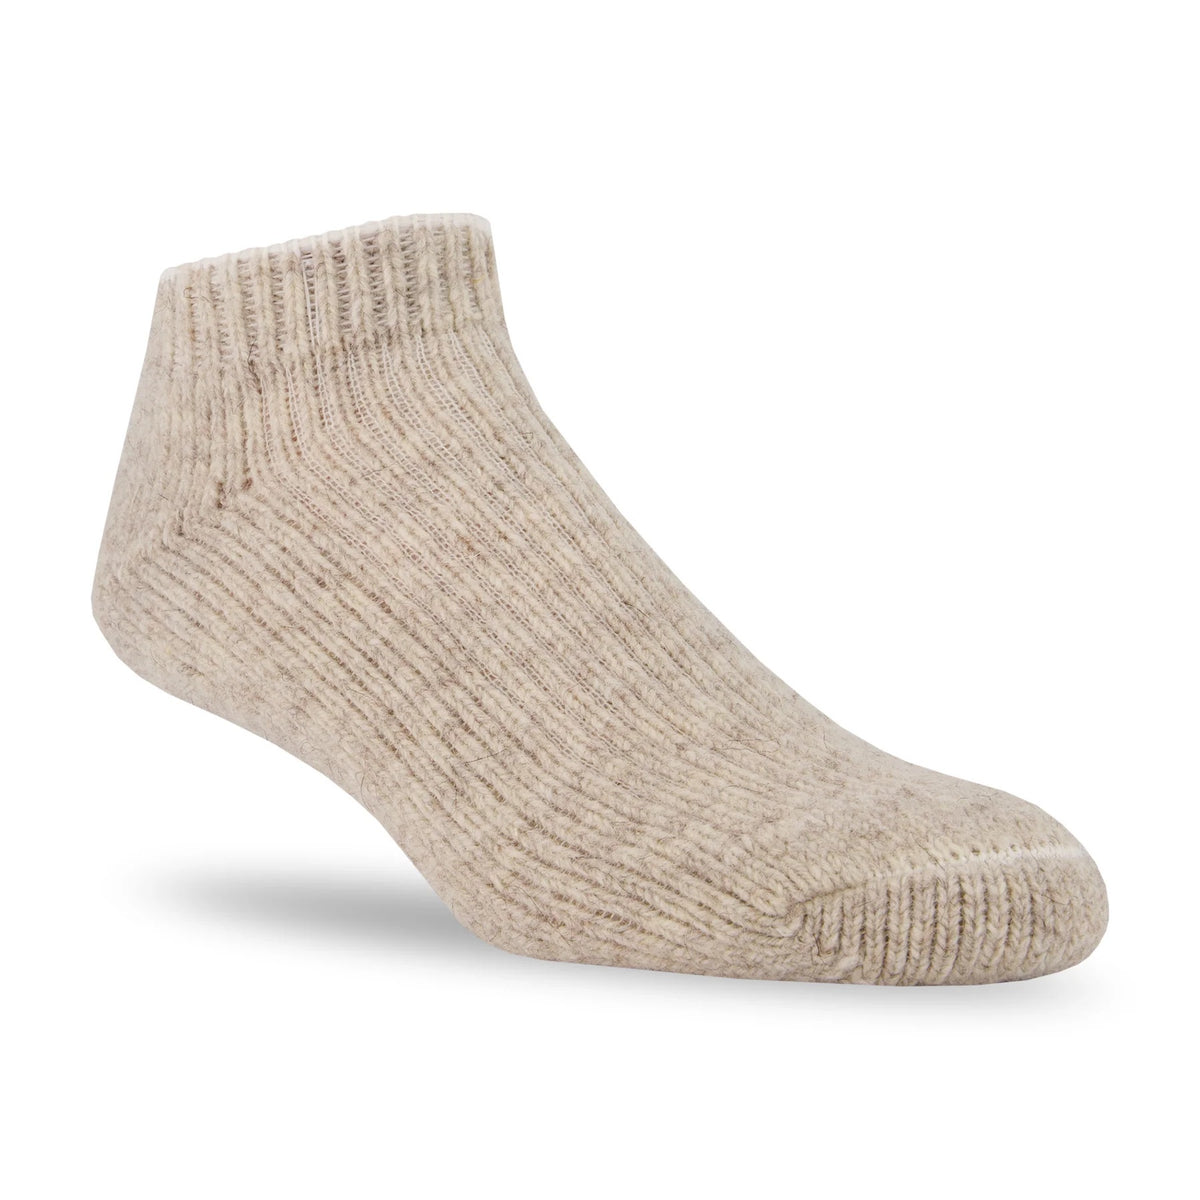 The Great Canadian Sox Co. J.B. FIELD'S ICELANDIC WOOL THERMAL SLIPPER –  Moonbeam Country Store